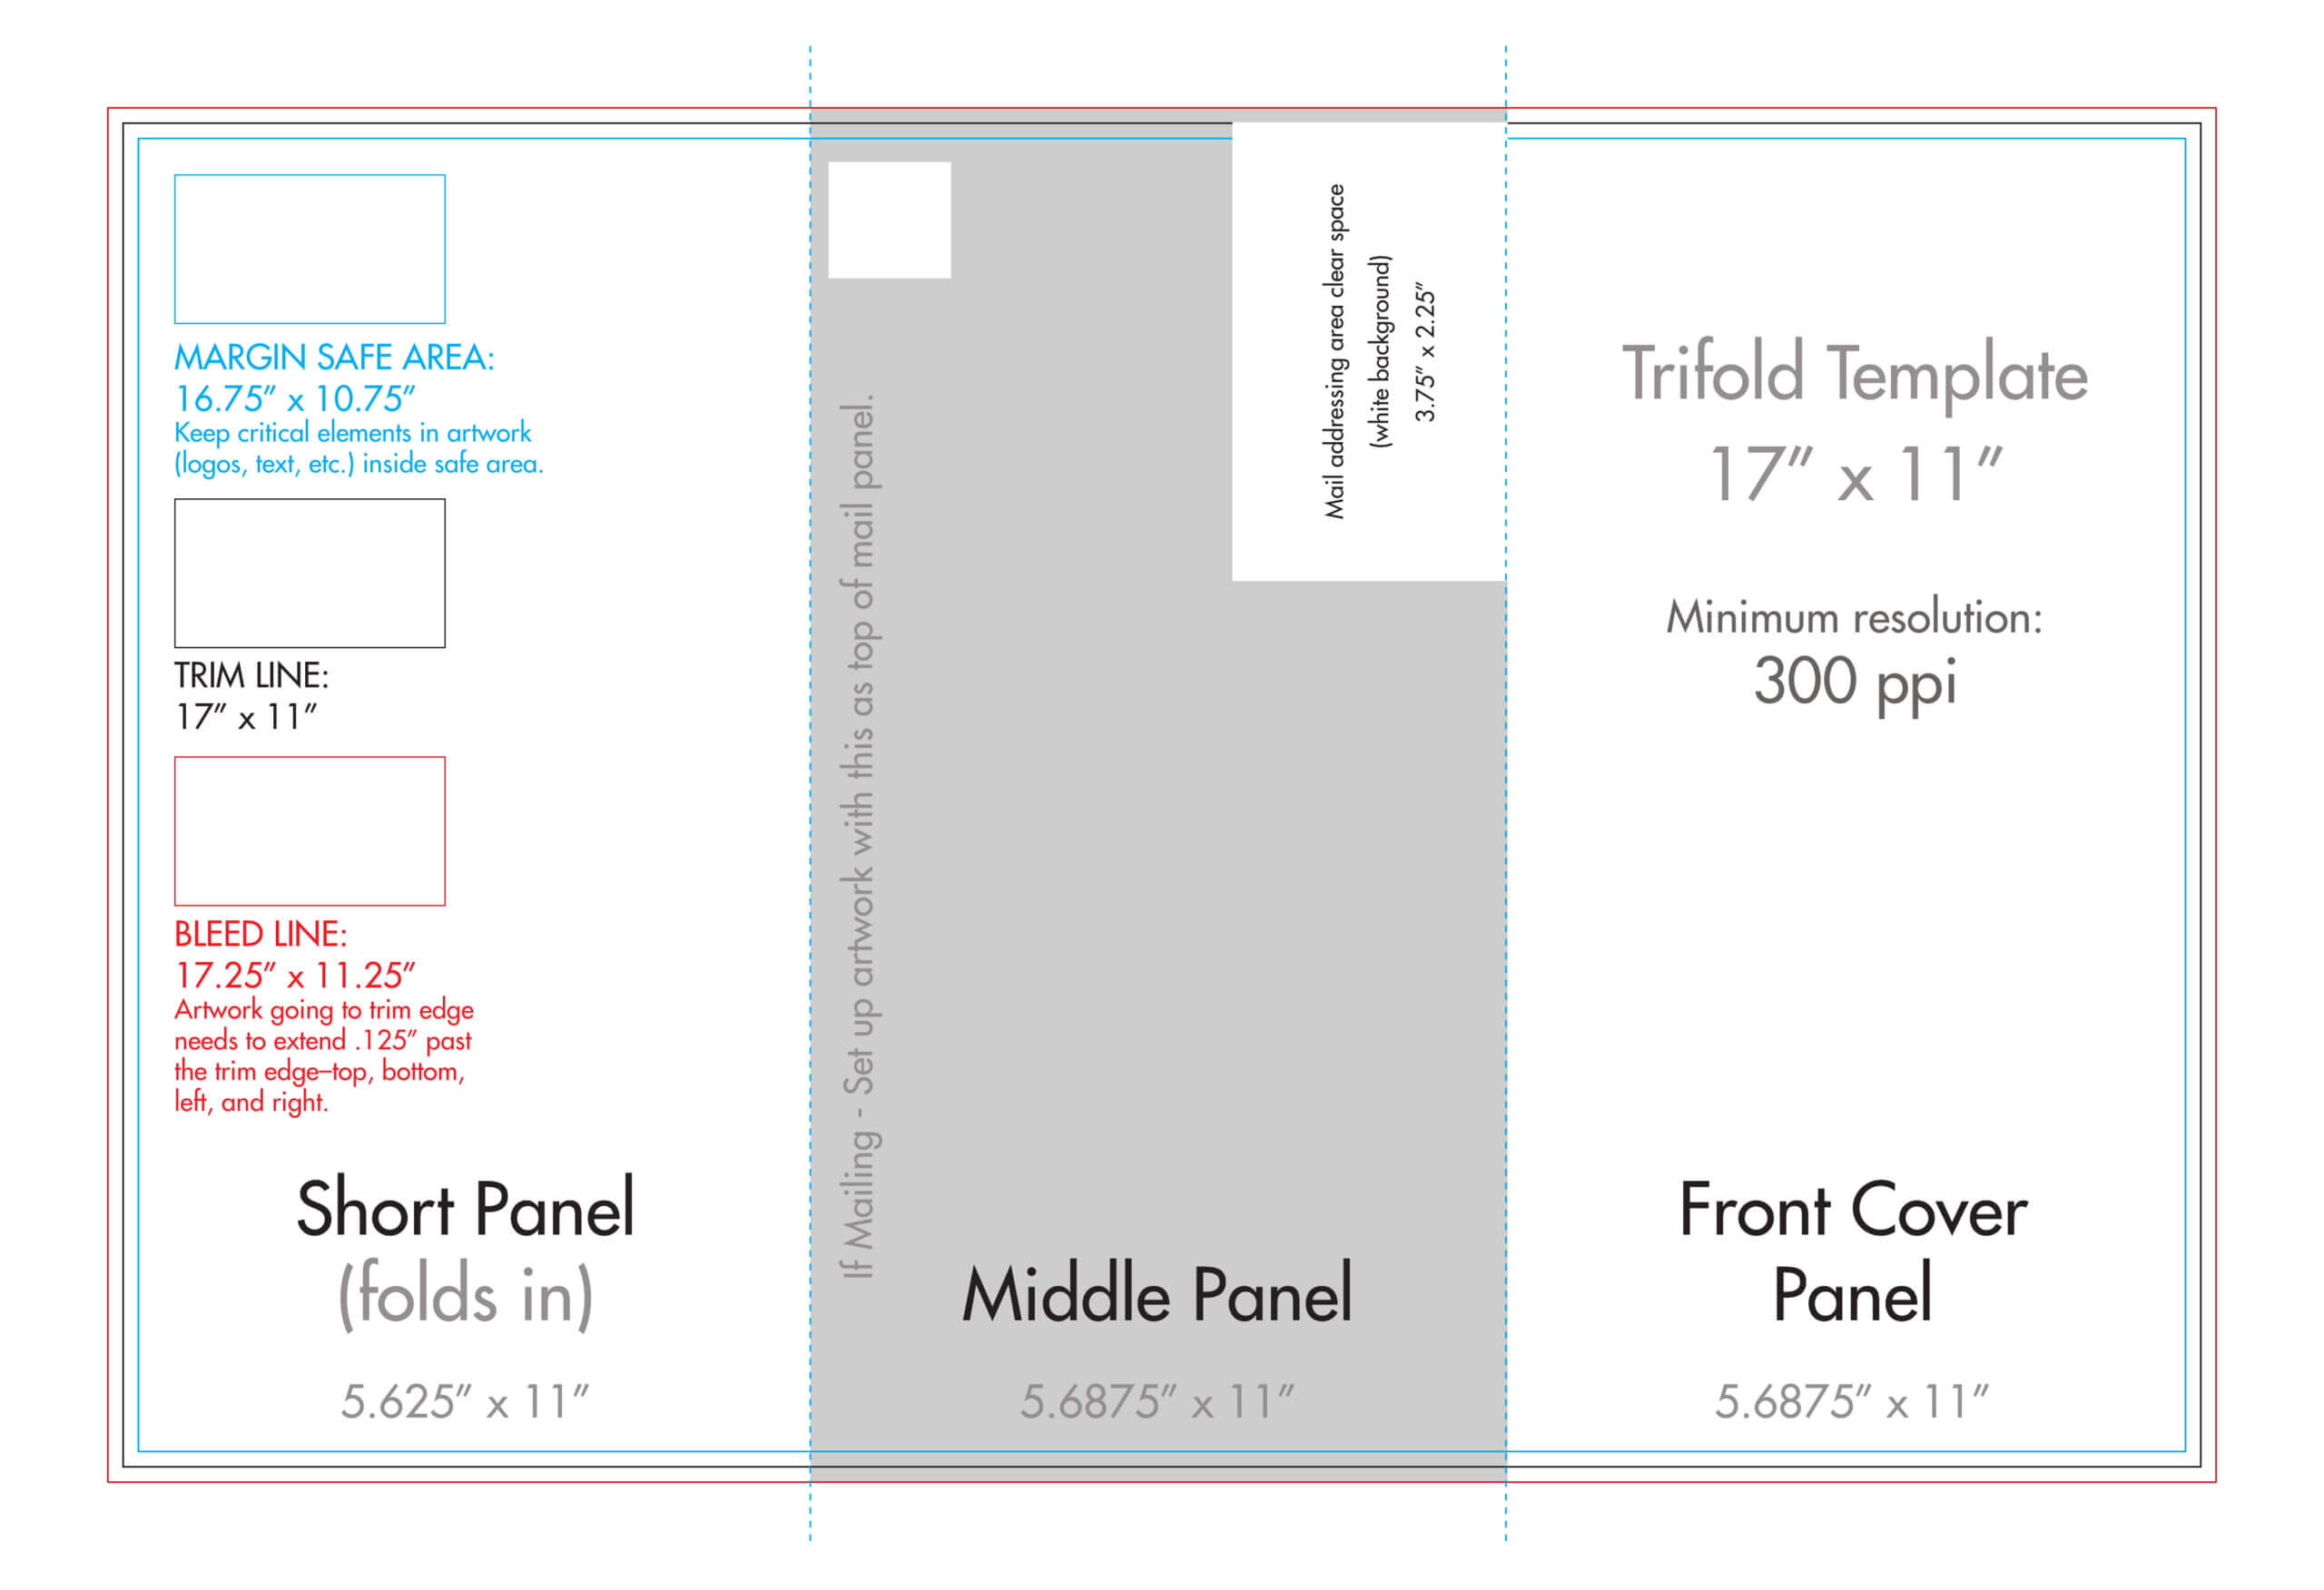 035 Trifold 11X17 Template Tri Fold Flyer Indesign For 11X17 Brochure Template